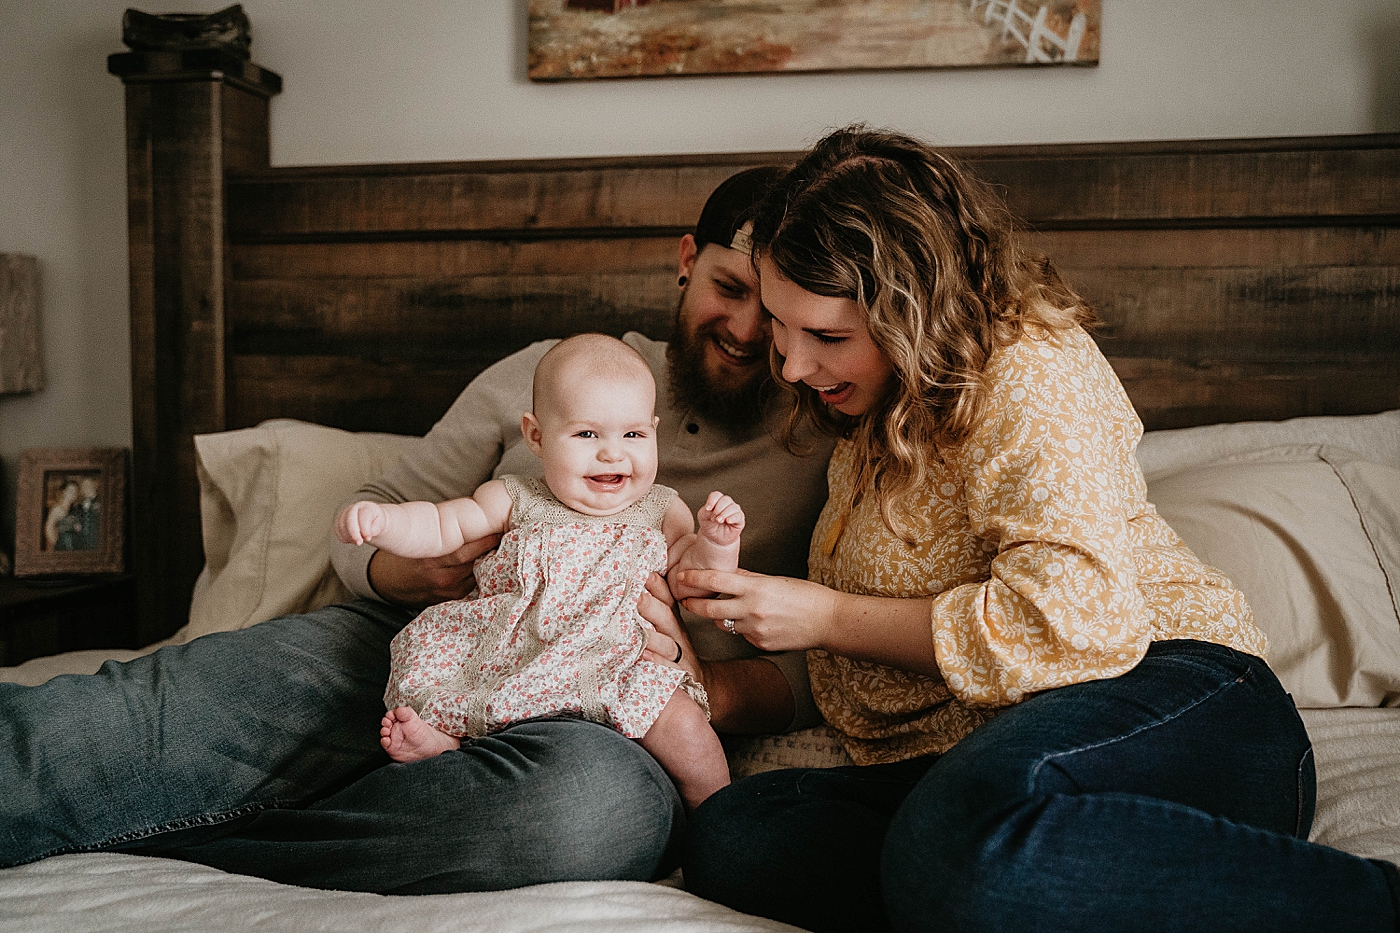 Laughing Baby of Dad's lap with Mom playing with baby At Home South Florida Family Photography captured by South Florida Family Photographer Krystal Capone Photography 